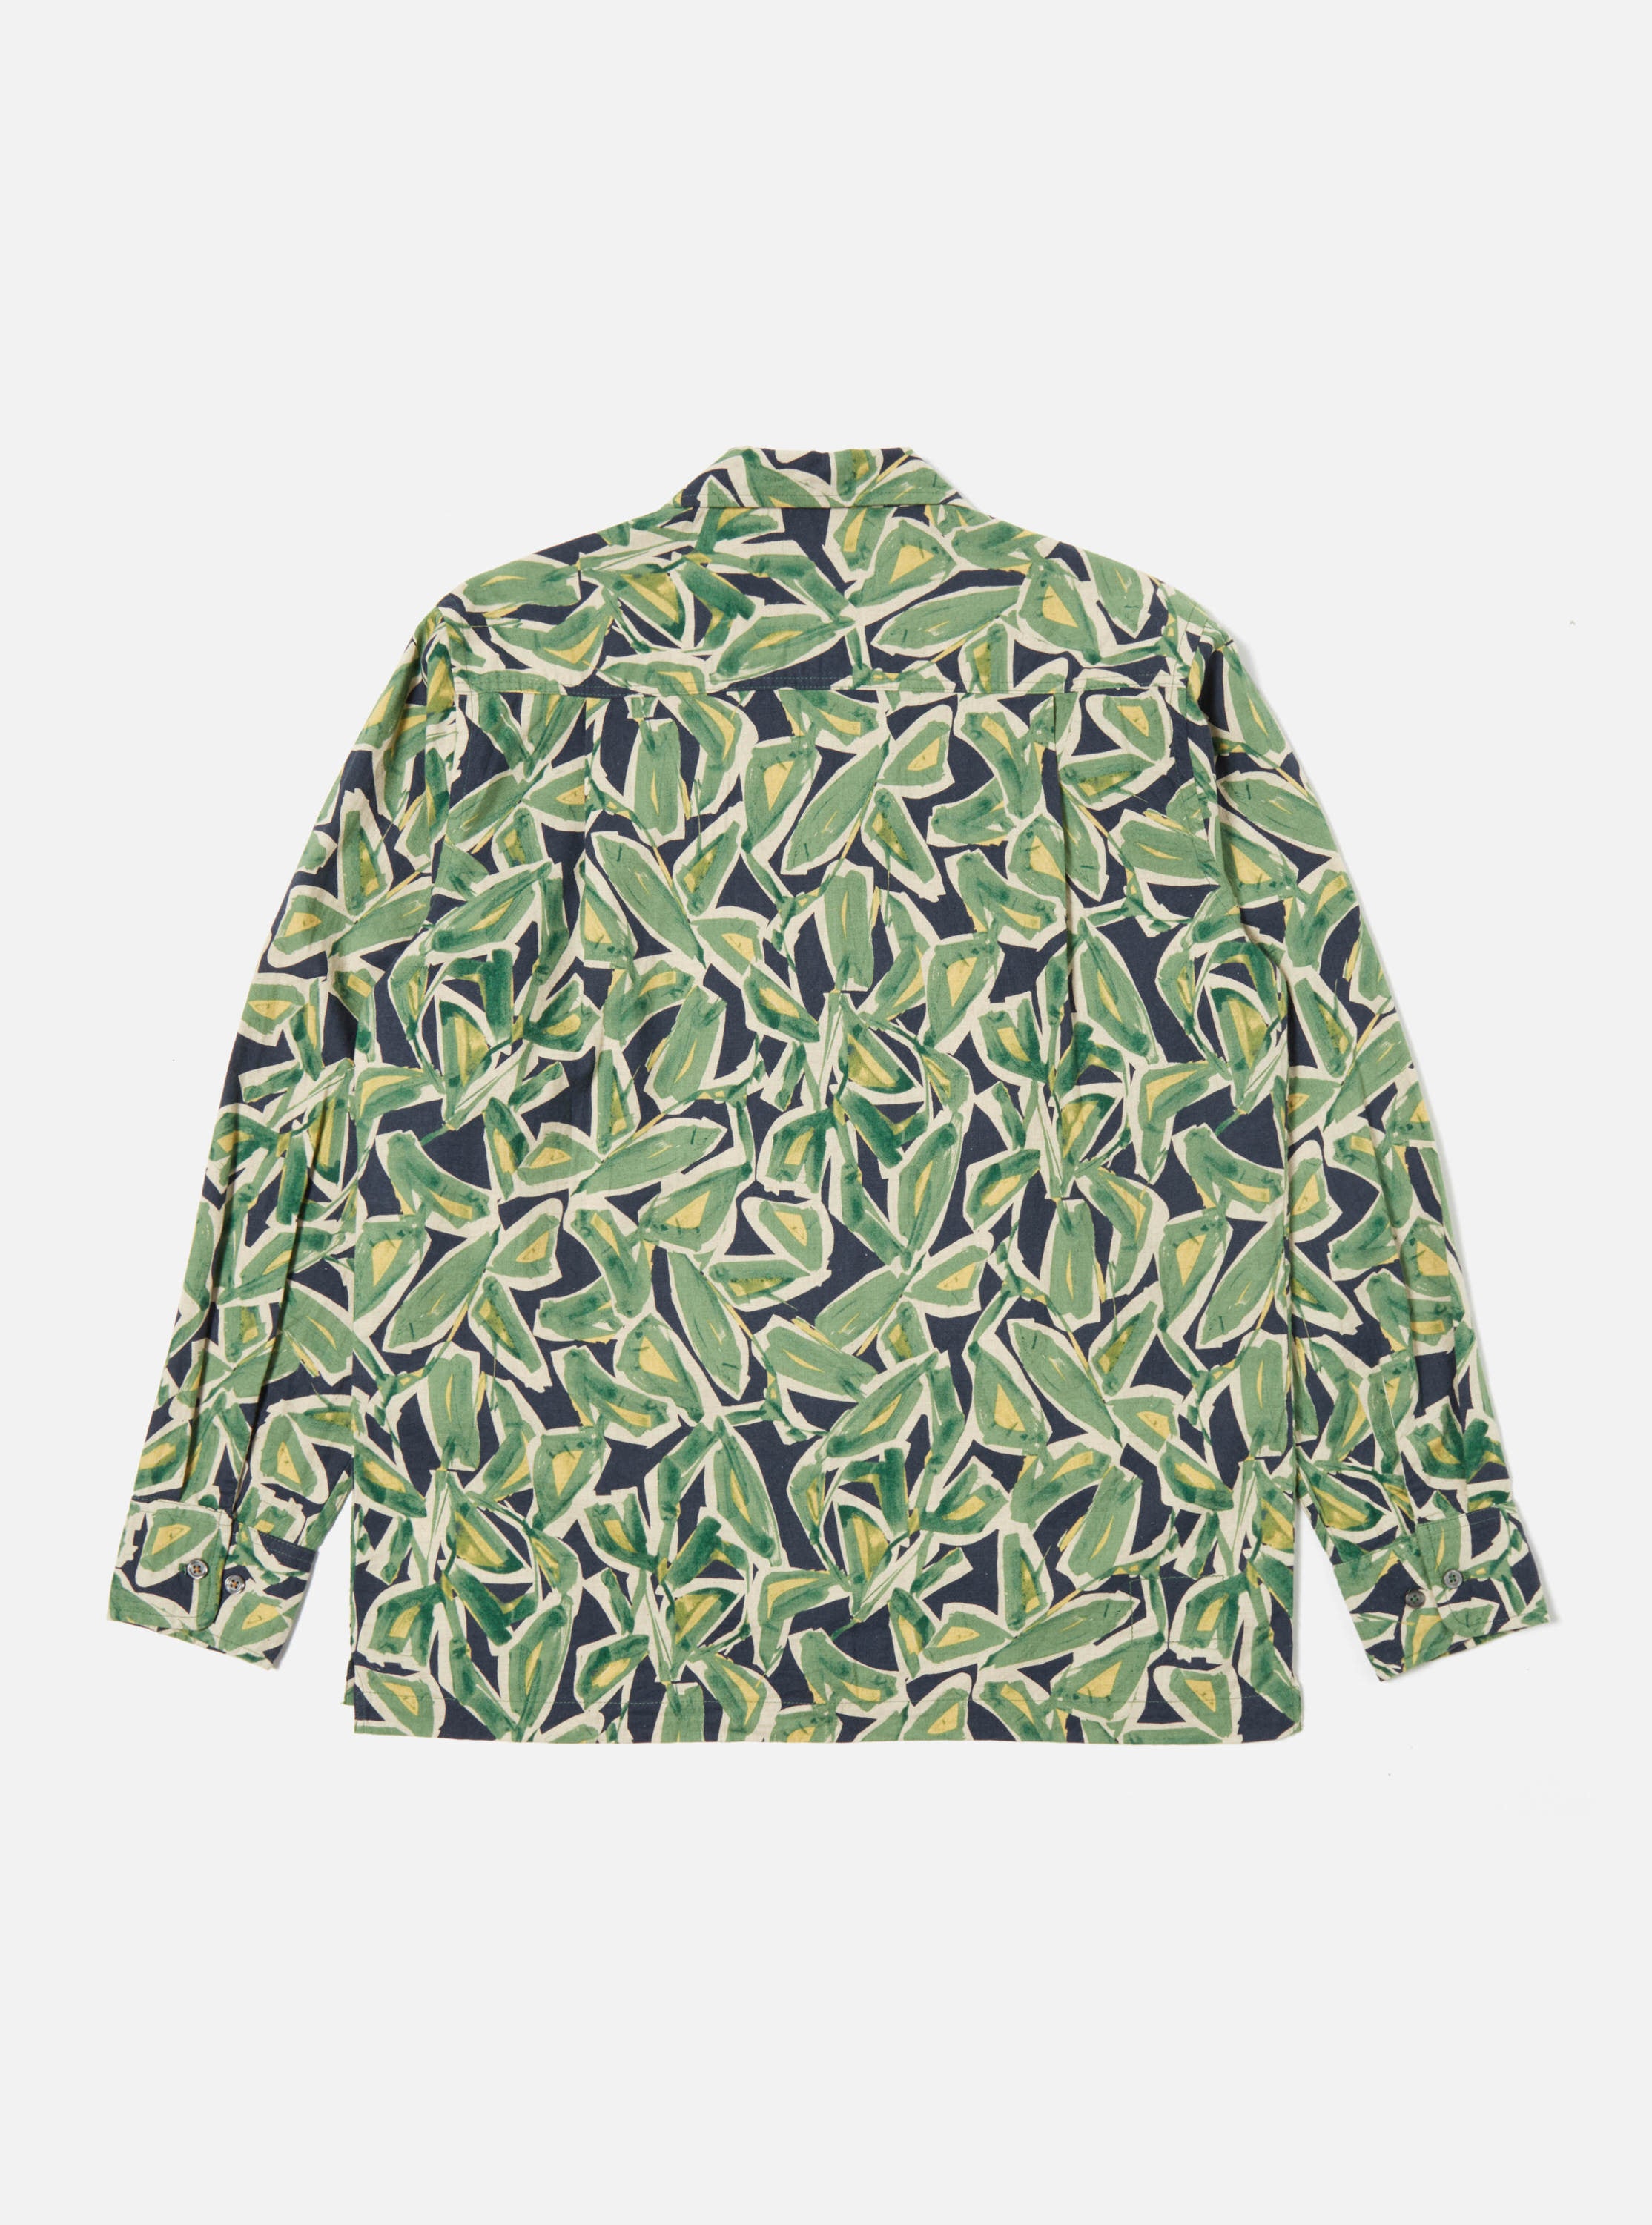 Universal Works L/S Camp Shirt in Navy Artist Flower Lincot